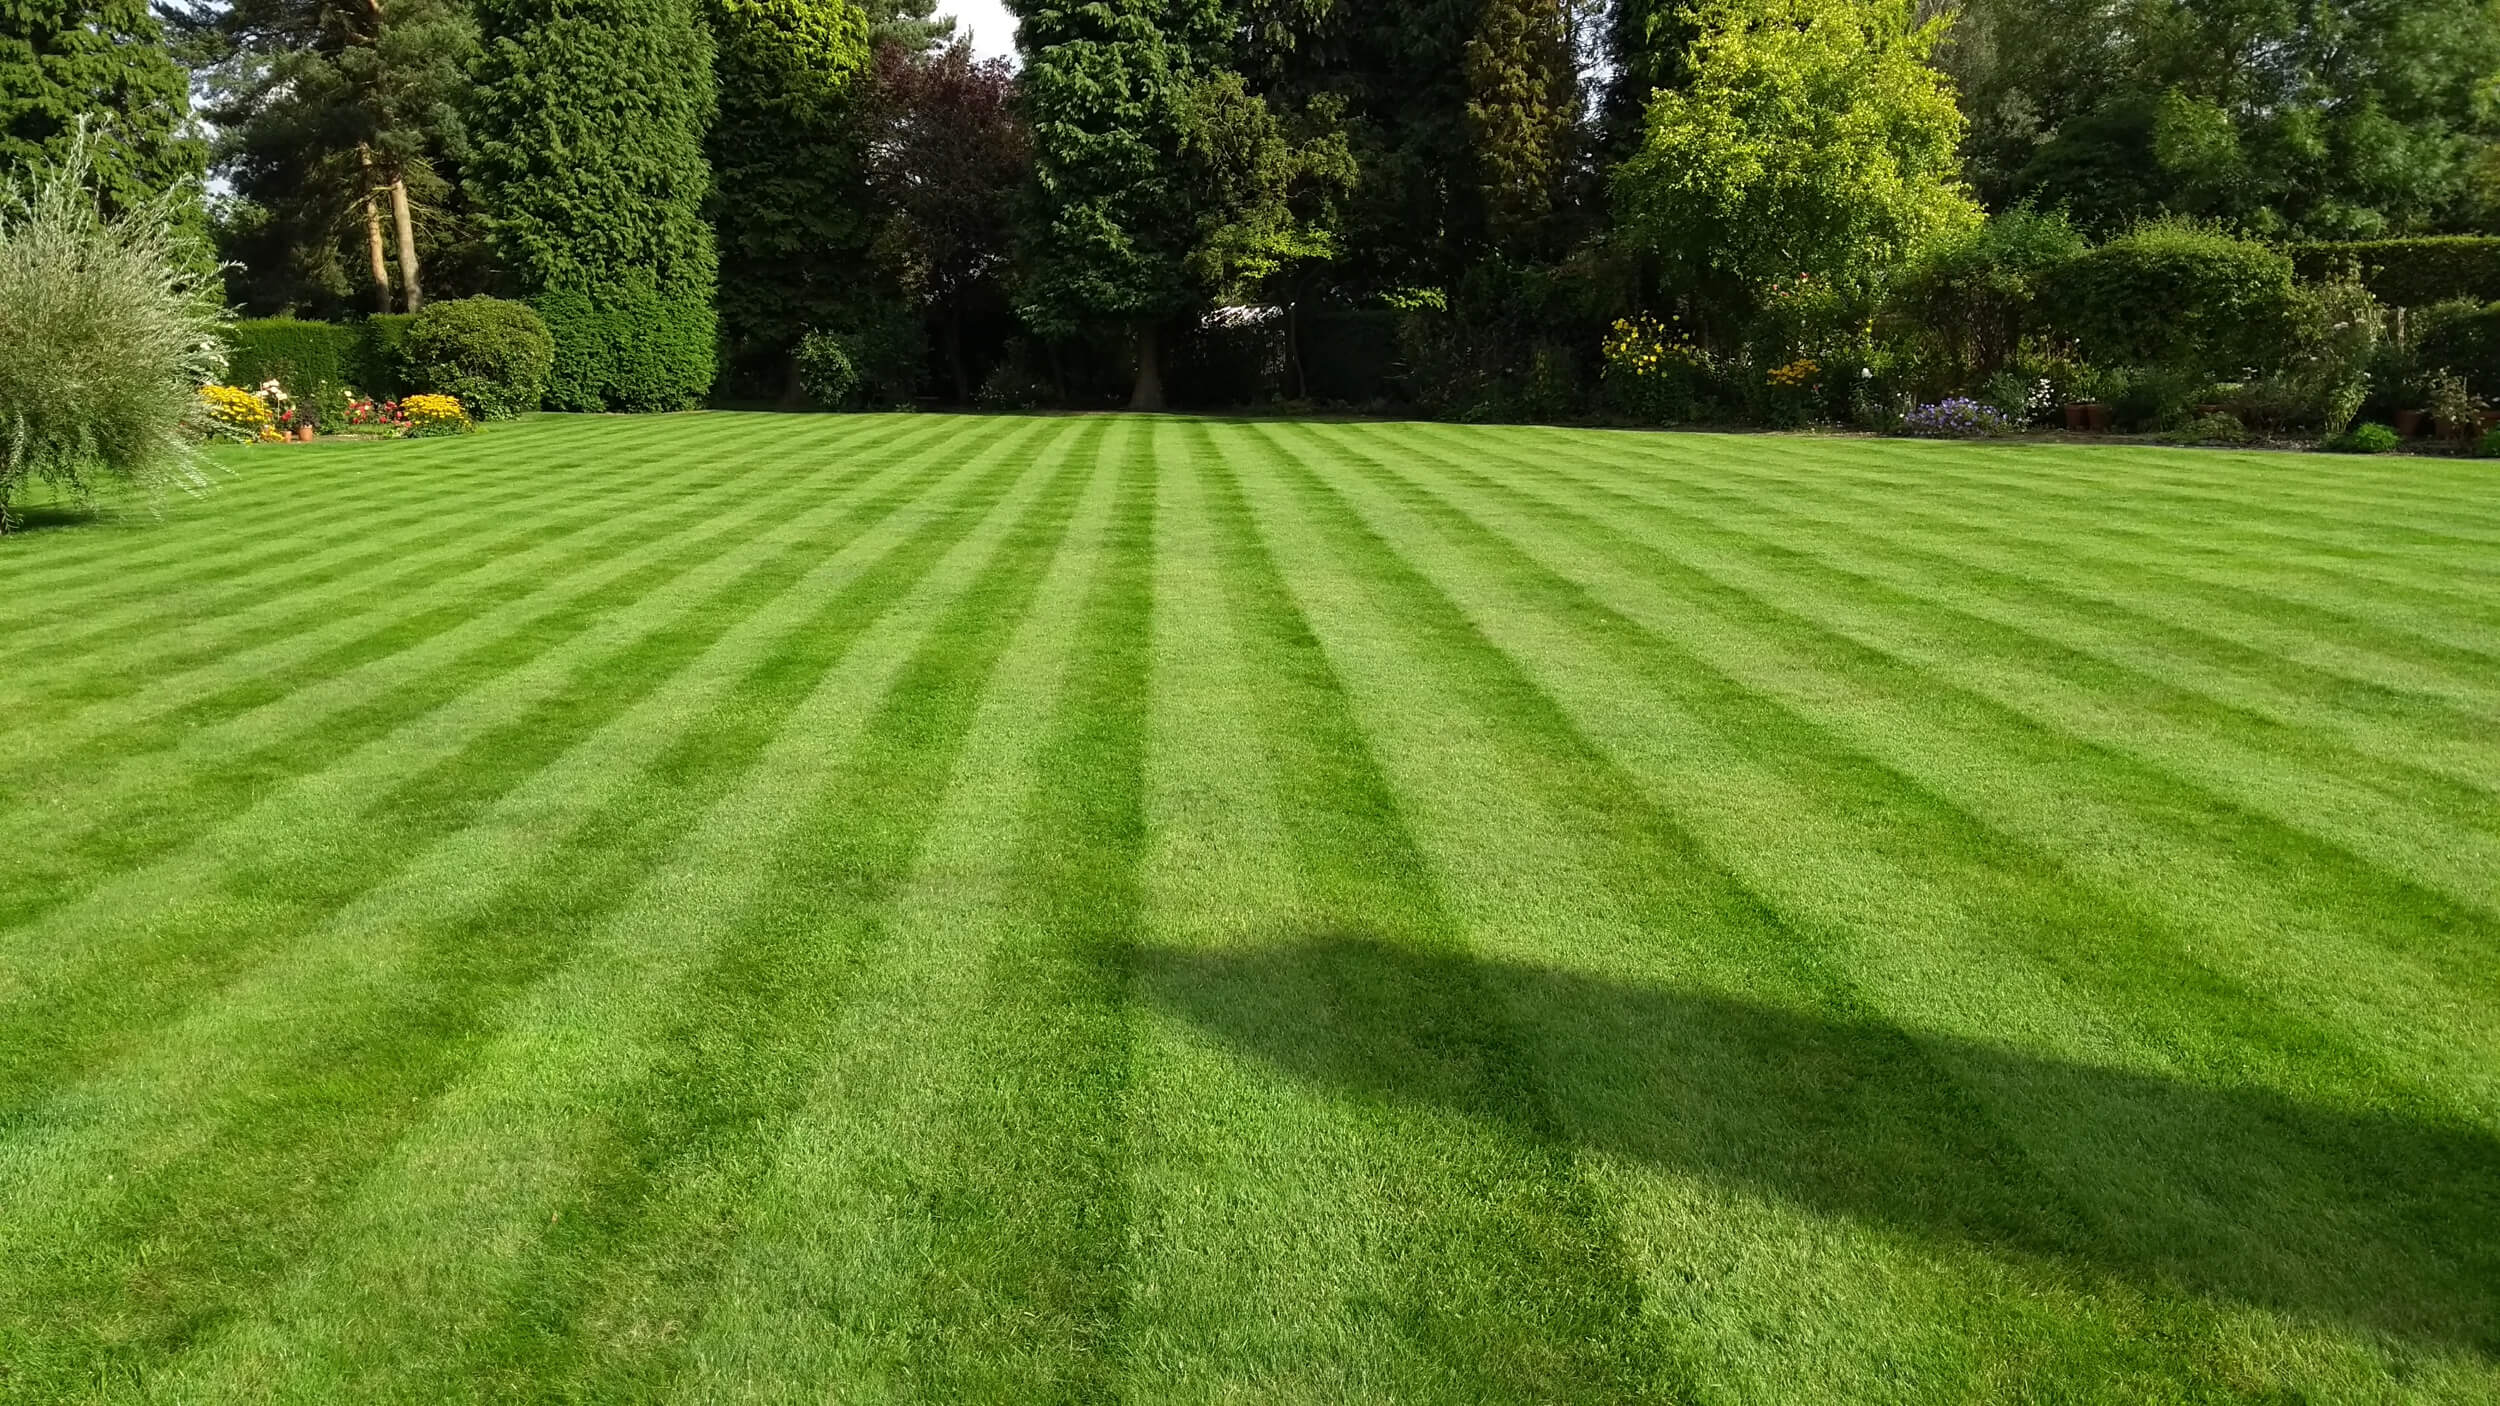 Lovable Landscaping maintenance in leicestershire